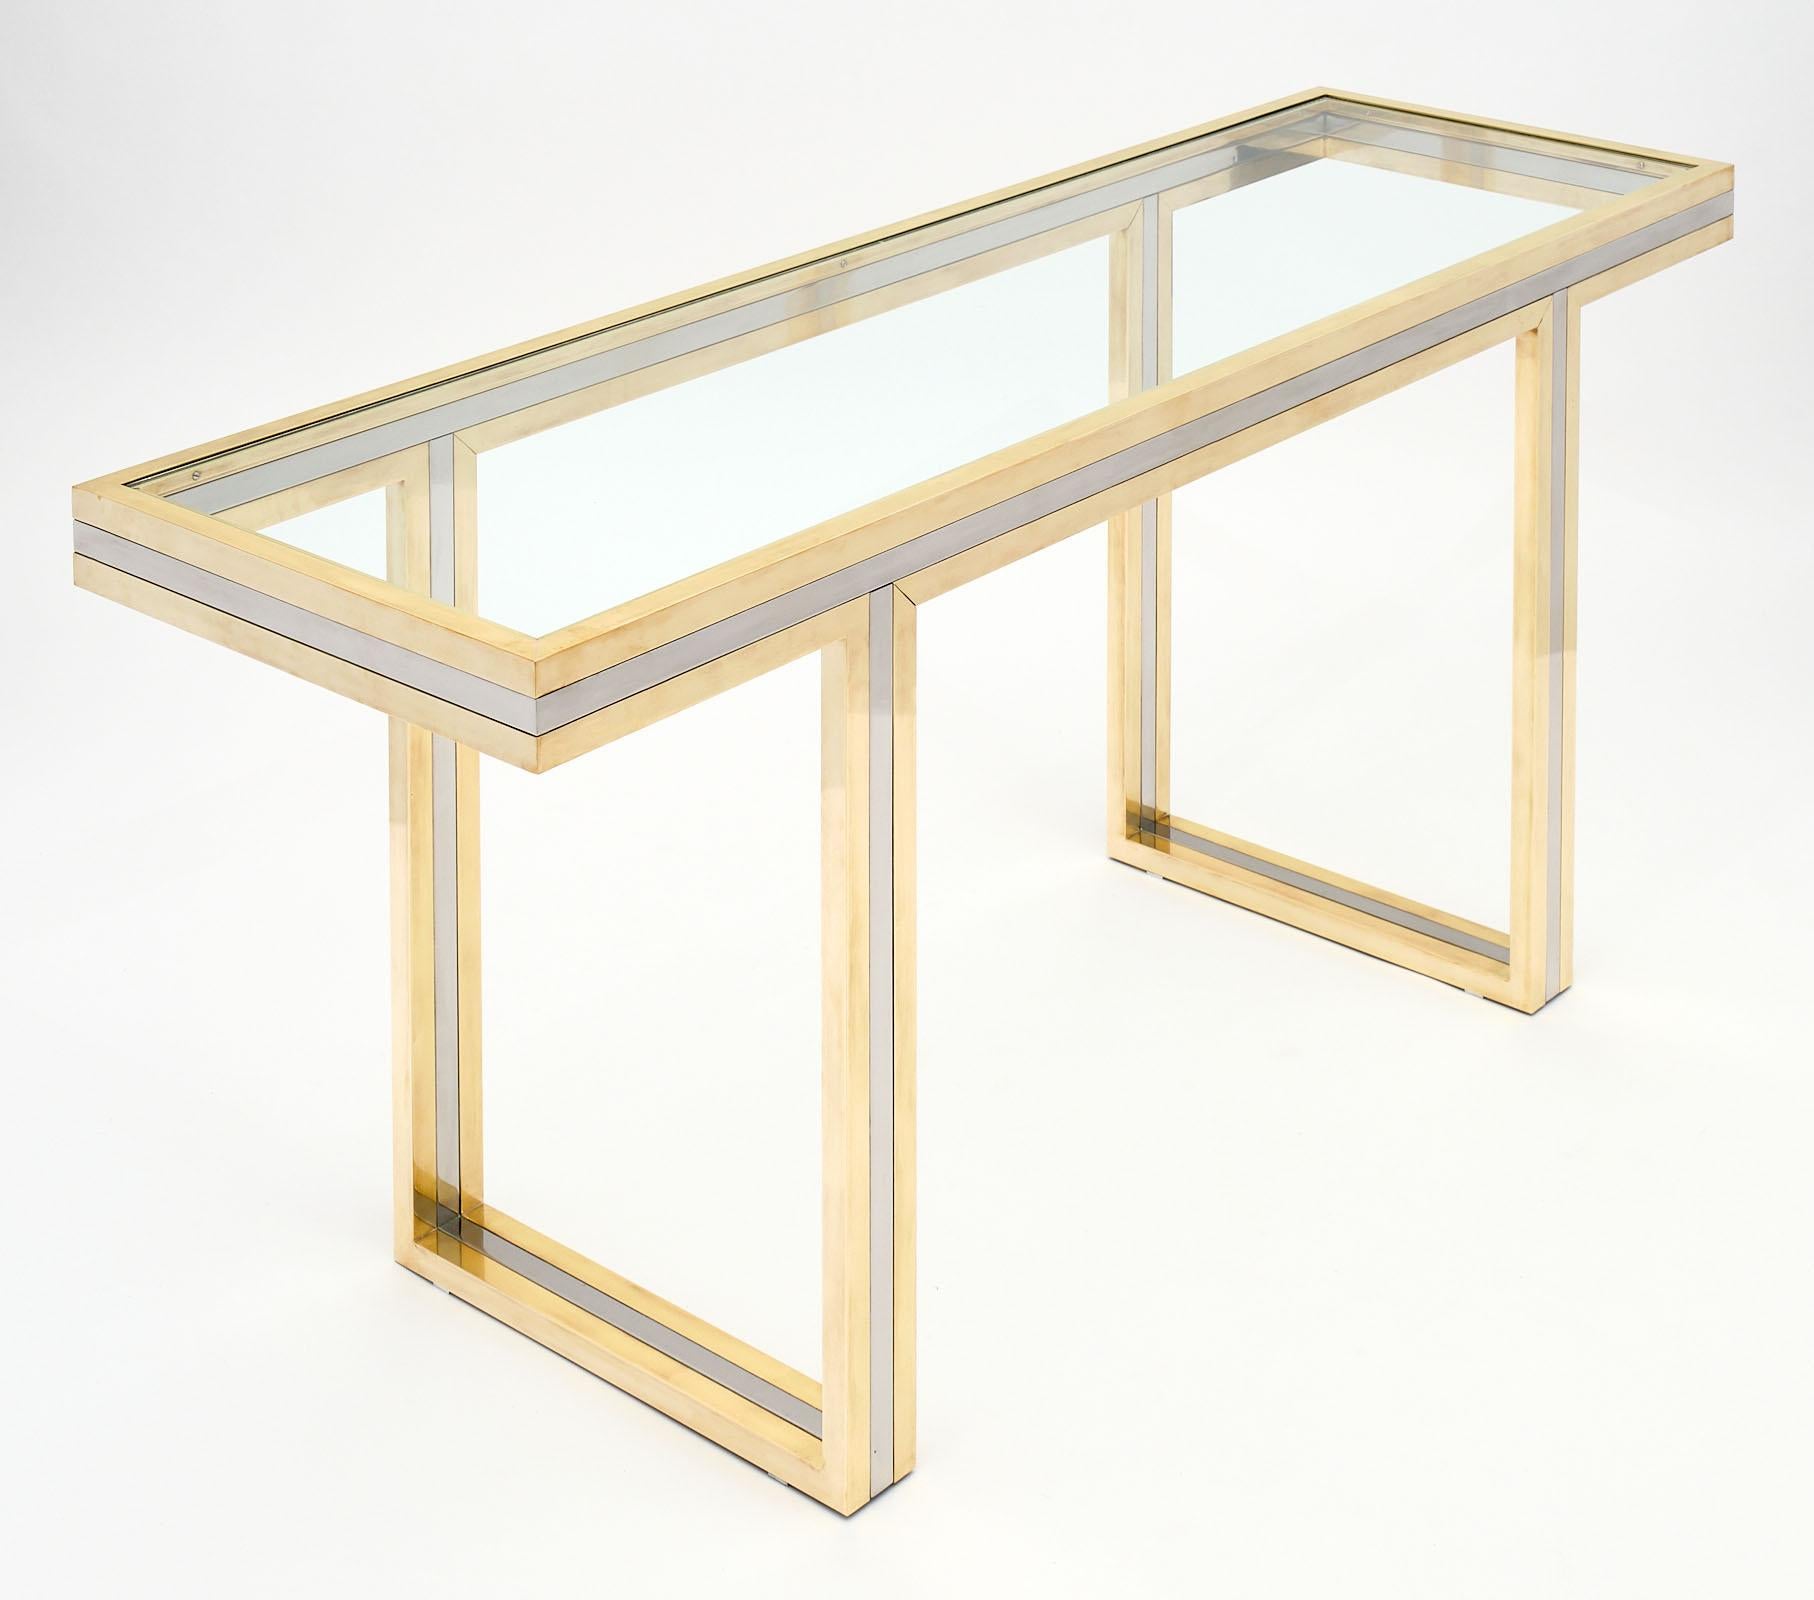 Romeo Rega signed console table made of brass and chromed steel. We love the square sectioned lines and the strong presence of this piece. This Italian console is signed by the iconic designer Romeo Rega.